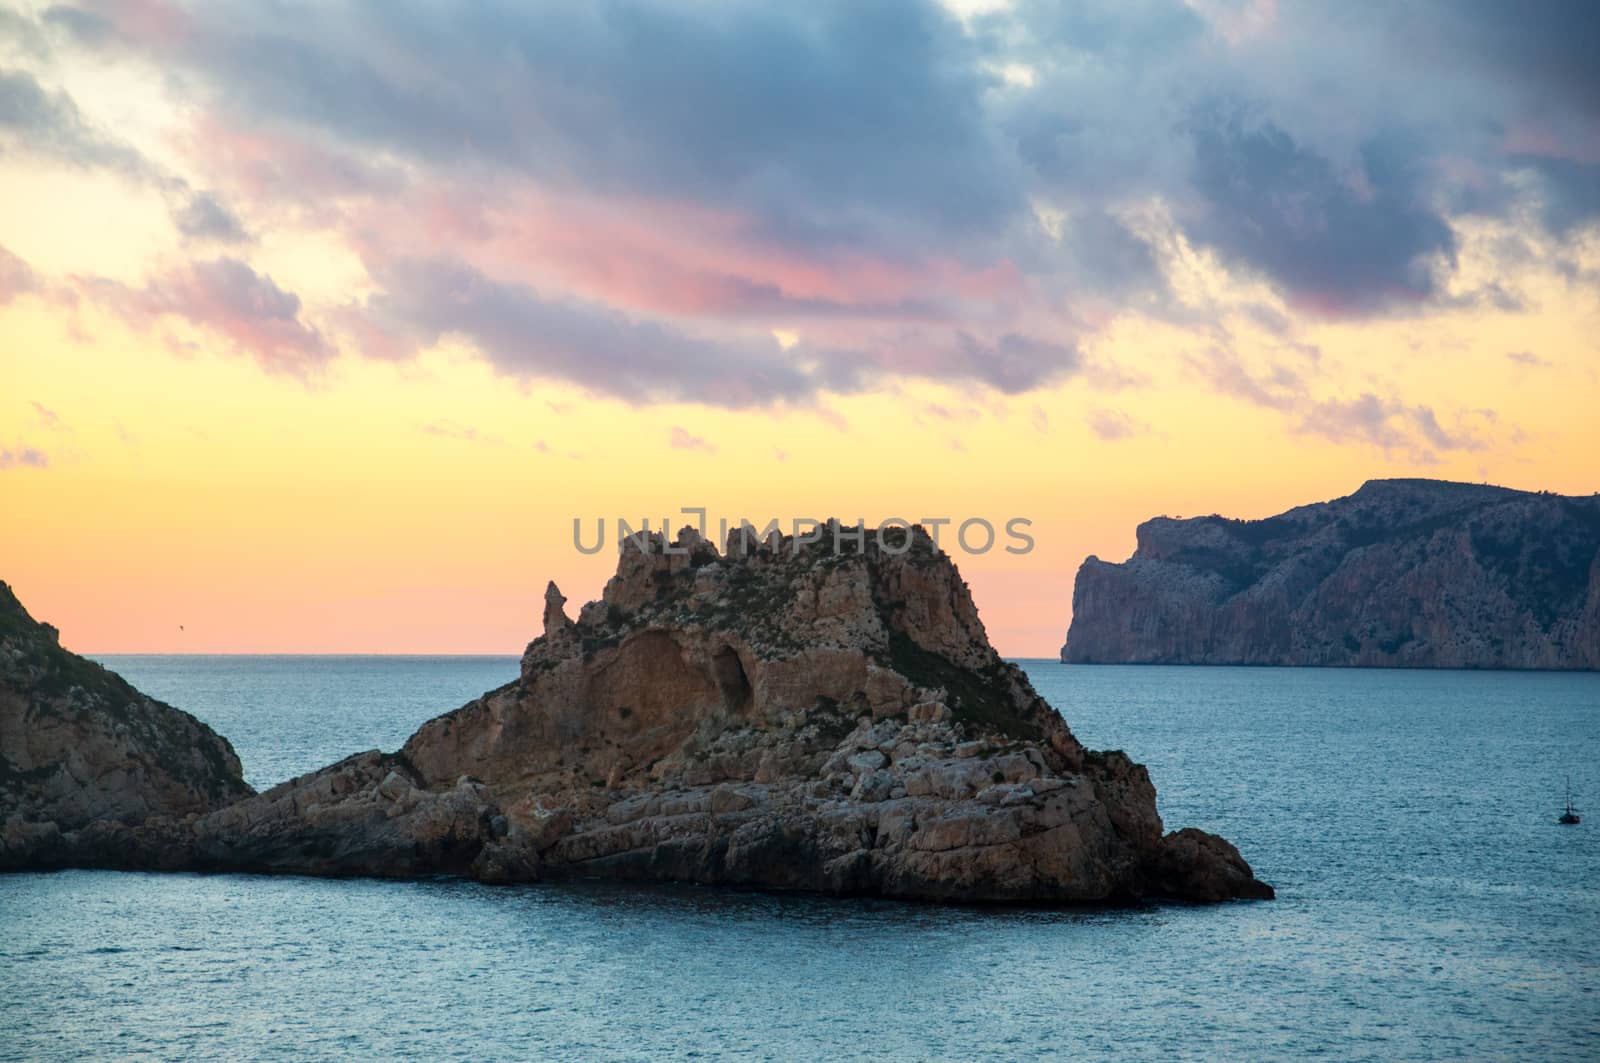 Small islands and sunset, February, Es Malgrat by ArtesiaWells